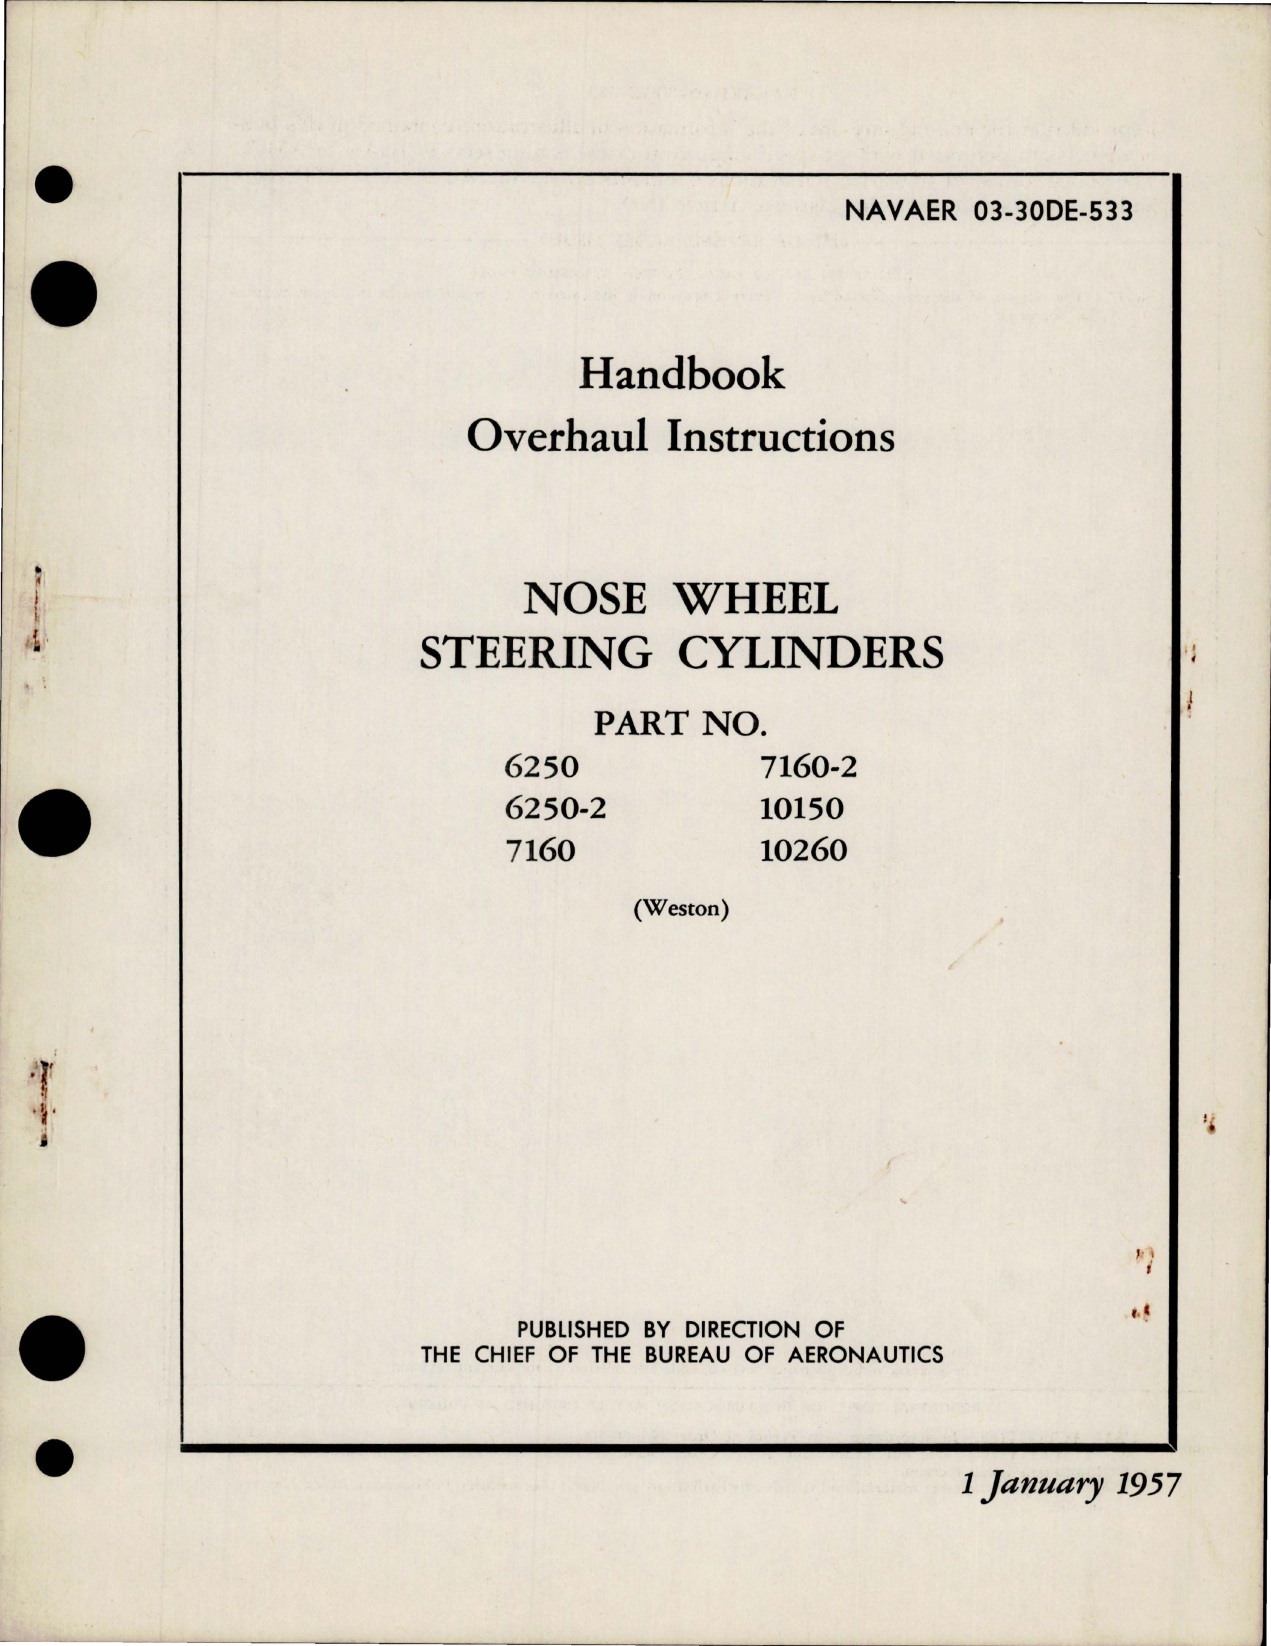 Sample page 1 from AirCorps Library document: Overhaul Instructions for Nose Wheel Steering Cylinders - Parts 6250, 6250-2, 7160, 7160-2, 10150, 10260